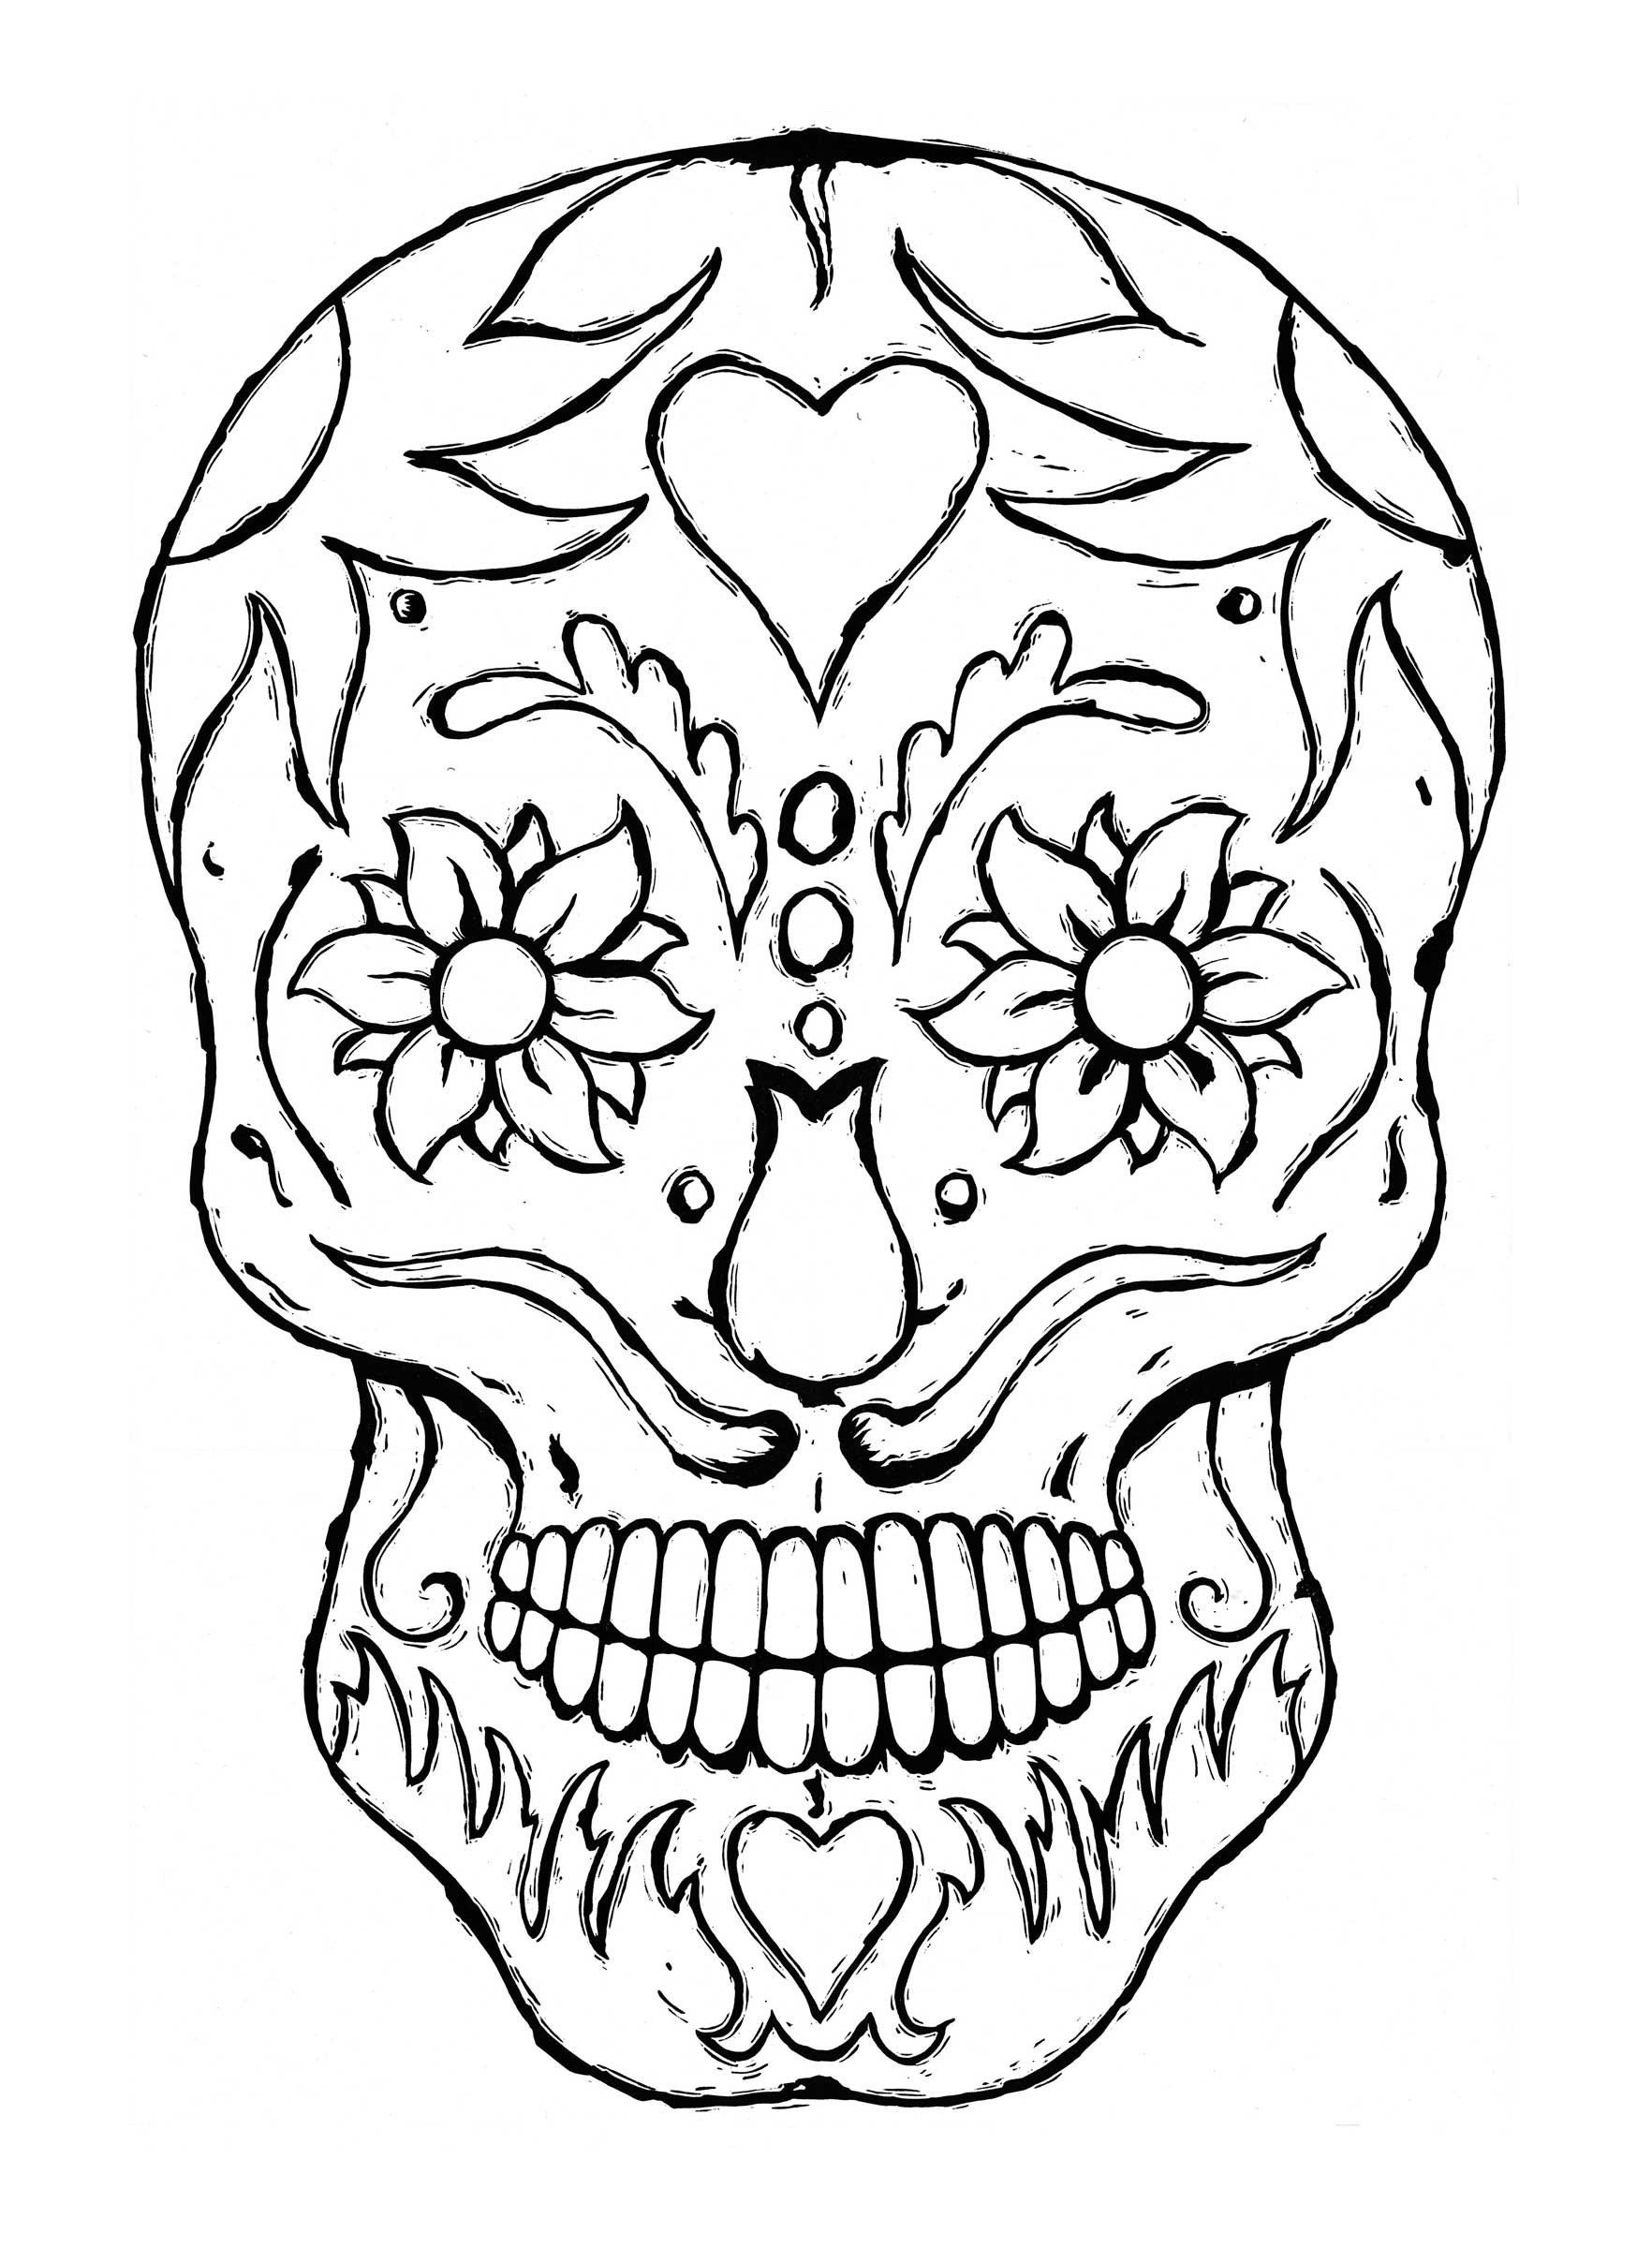 Cool Coloring Pages For Teenagers - Coloring Home